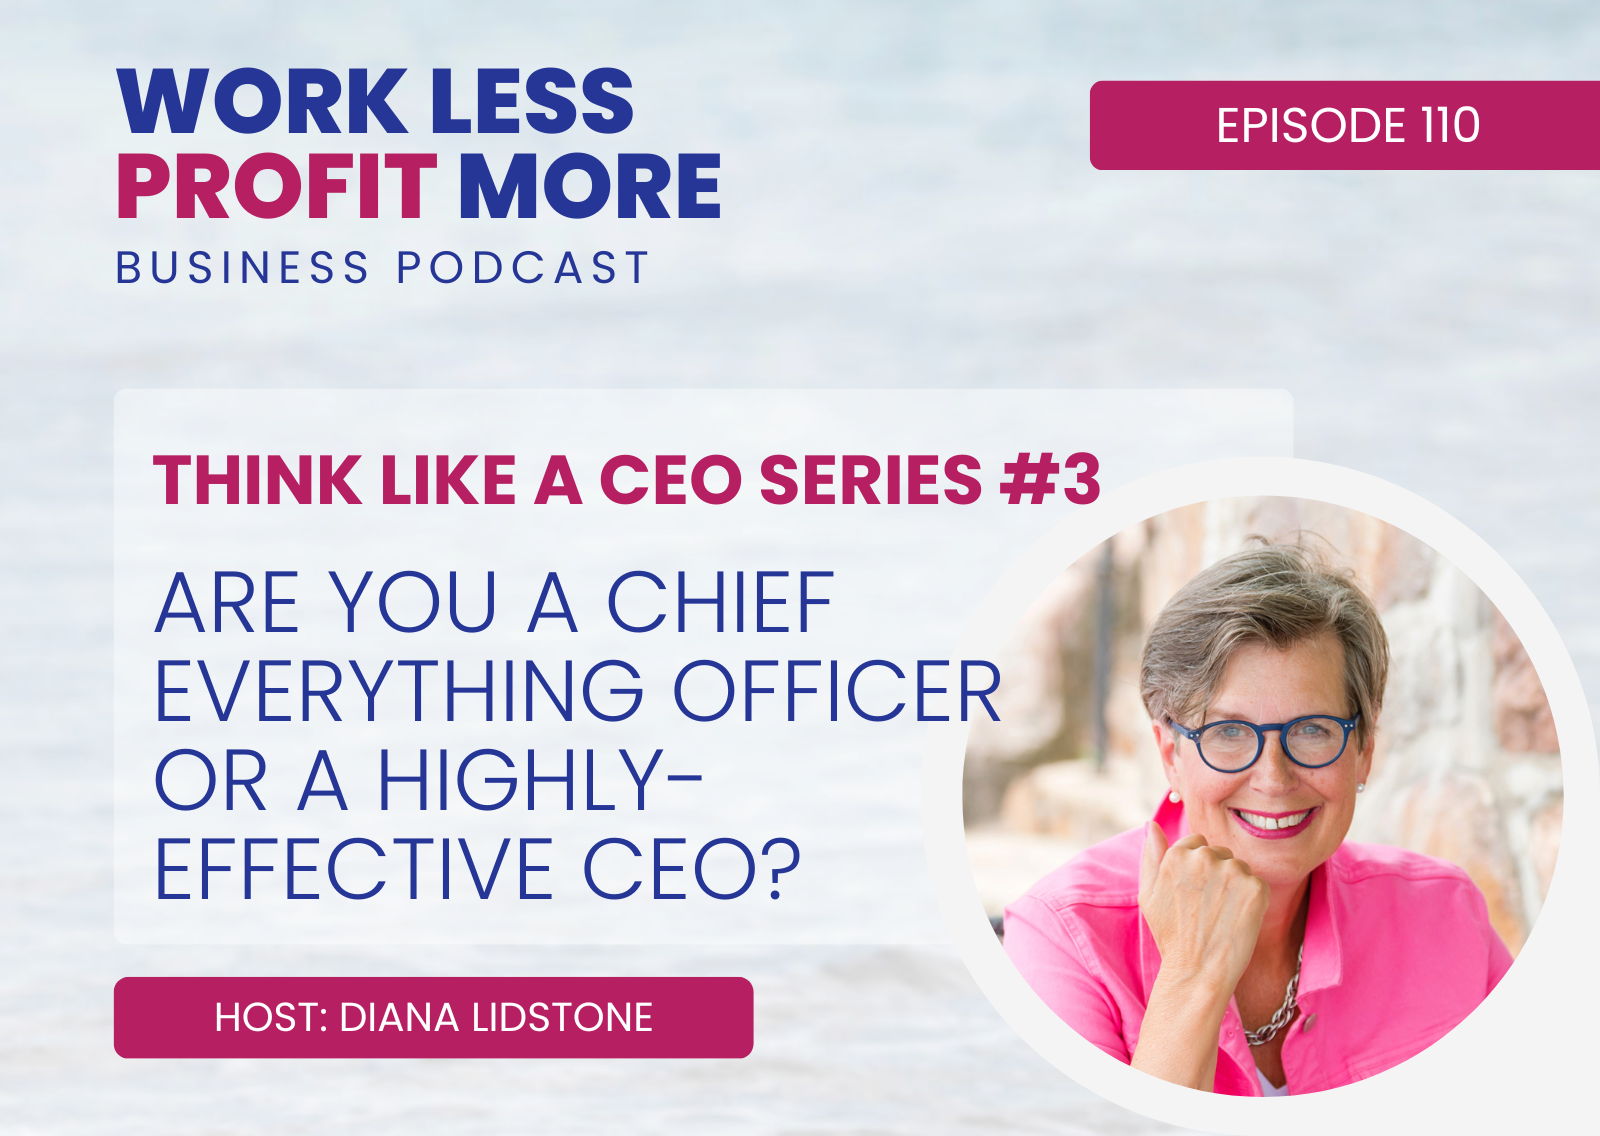 Are You a Chief Everything Officer or a Highly-Effective CEO? (THINK LIKE A CEO series #3)